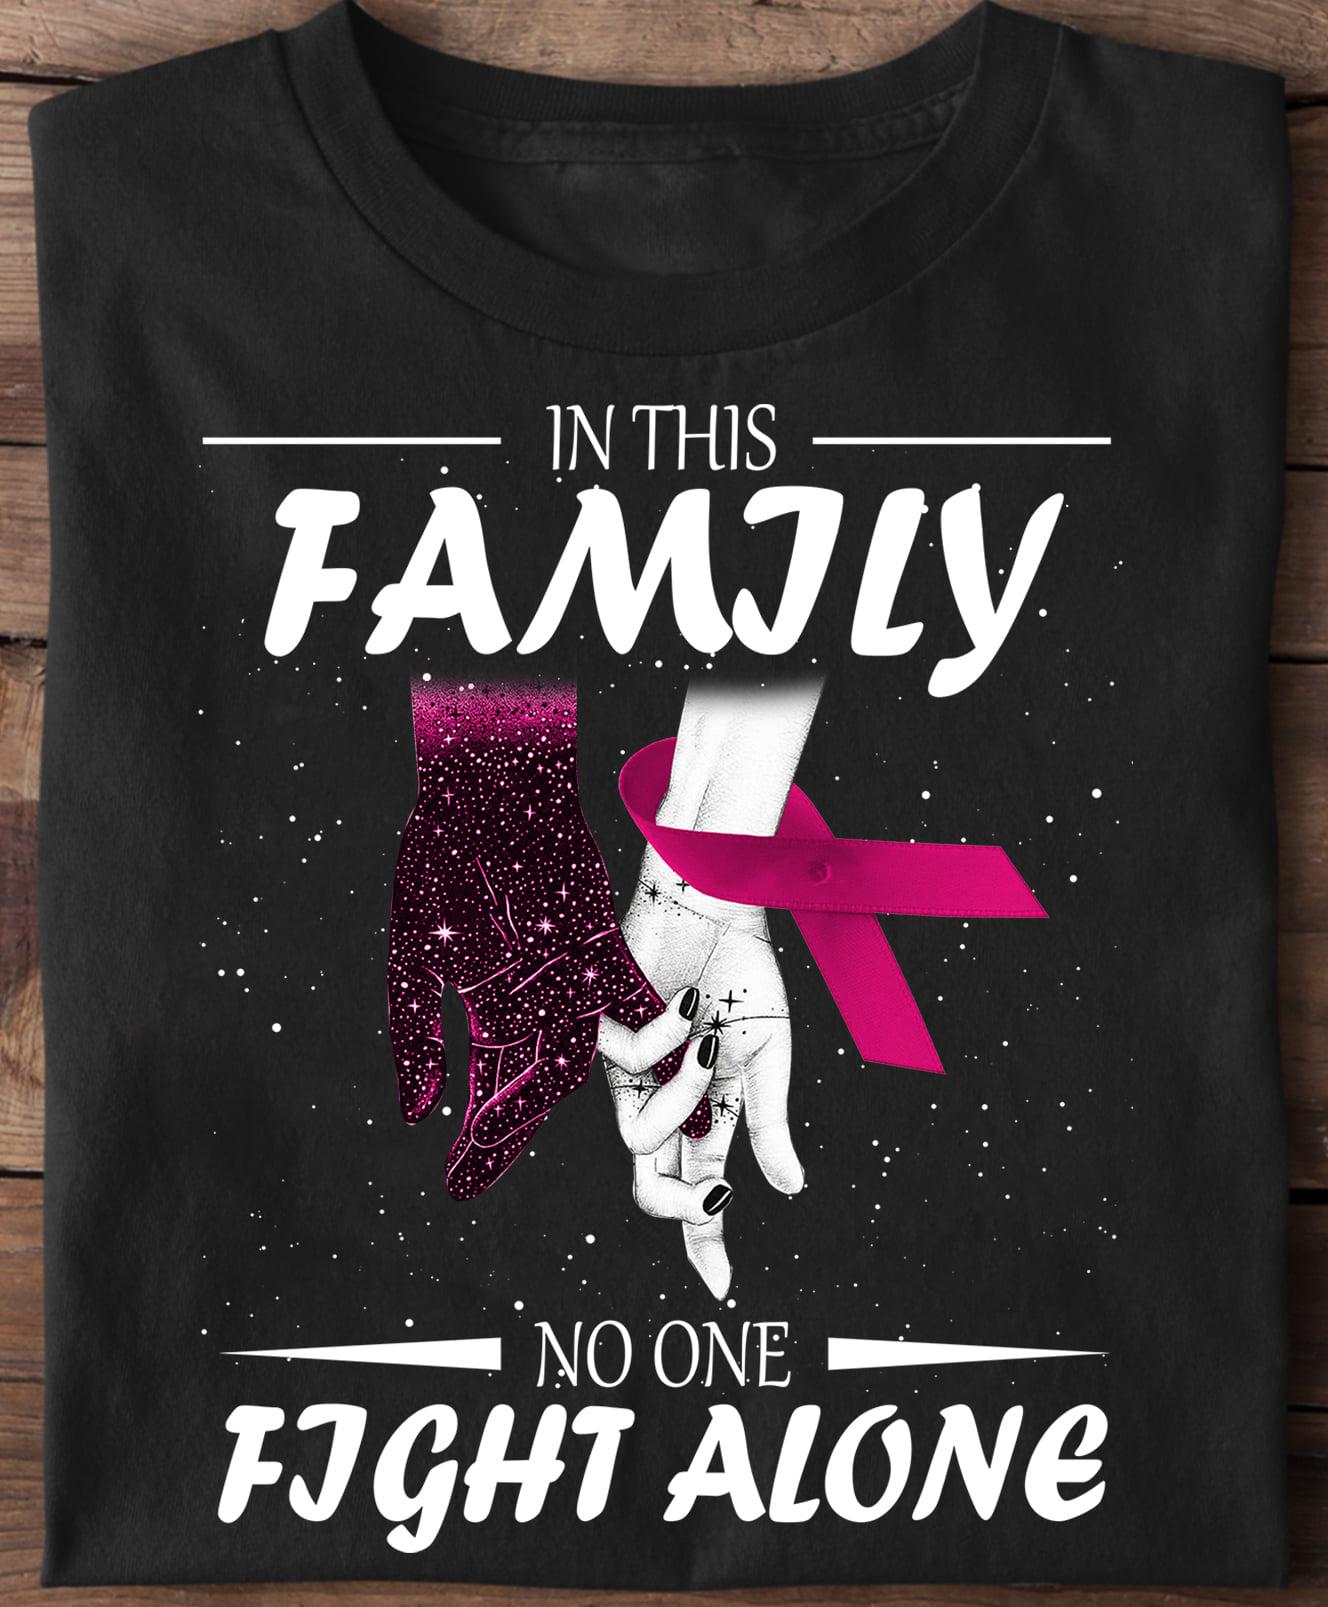 In this family, no one fight alone - Breast cancer awareness, pink cancer ribbon